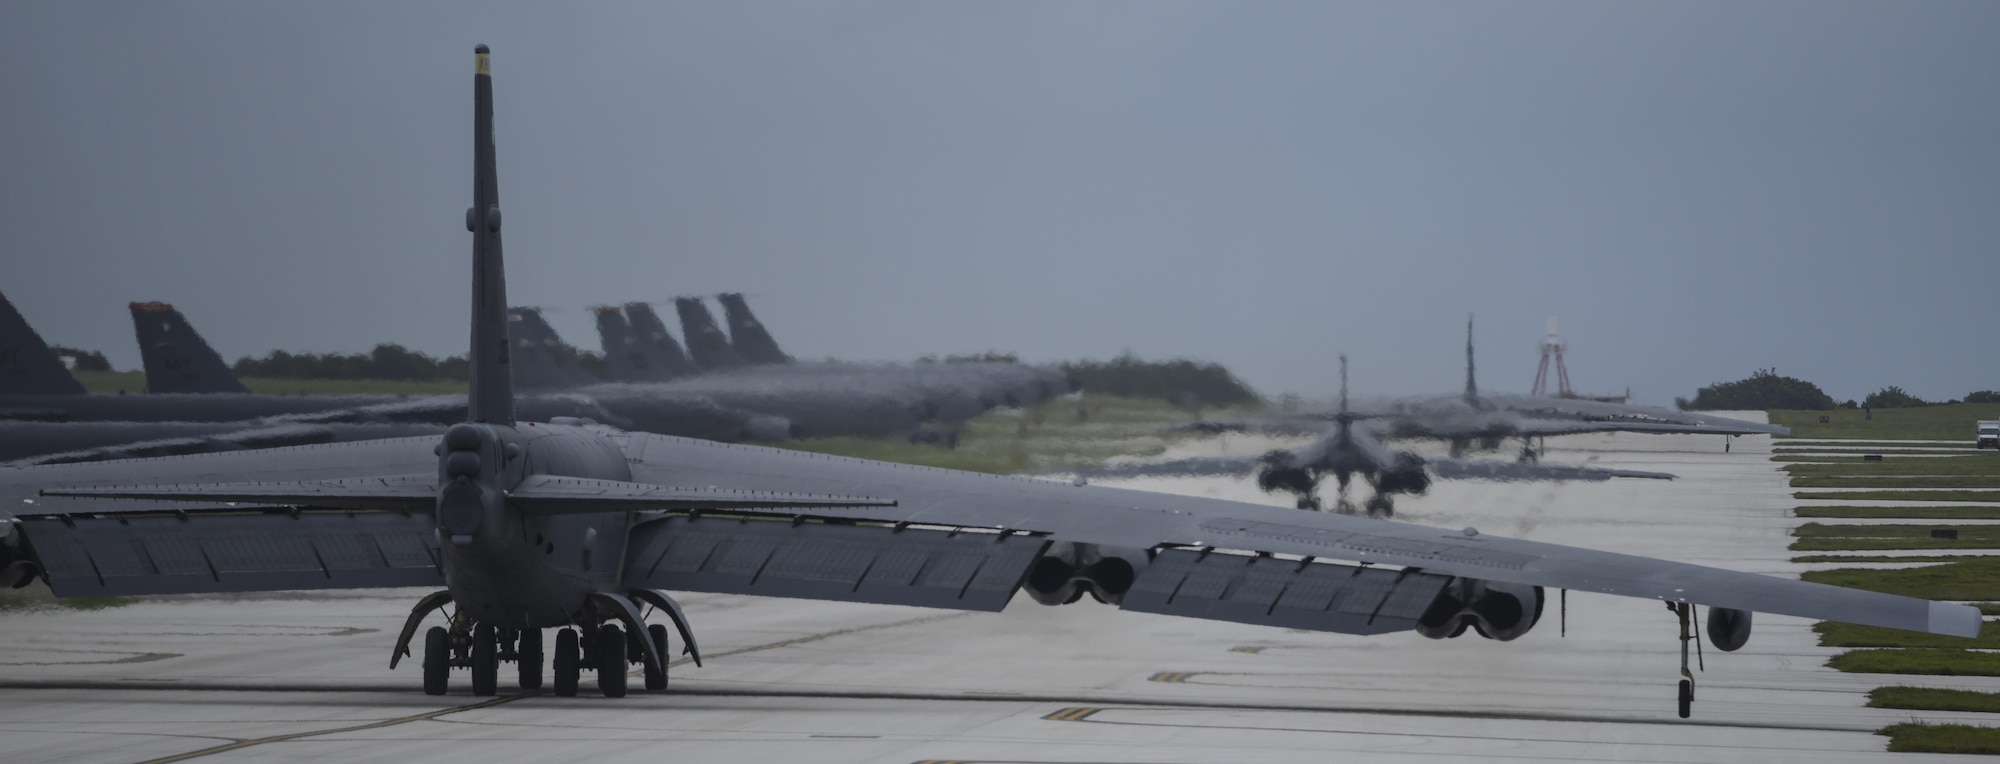 A U.S. Air Force B-52 Stratofortress, B-1 Lancer and B-2 Spirit launch from Andersen Air Force Base, Guam, for an integrated bomber operation Aug.17, 2016. This mission marks the first time in history that all three of Air Force Global Strike Command's strategic bomber aircraft are simultaneously conducting integrated operations in the U.S. Pacific Command area of operations. As of Aug. 15, the B-1 Lancer will be temporarily deployed to Guam in support of U.S. Pacific Command's Continuous Bomber Presence mission. (U.S. Air Force photo by Tech Sgt Richard P. Ebensberger/Released)